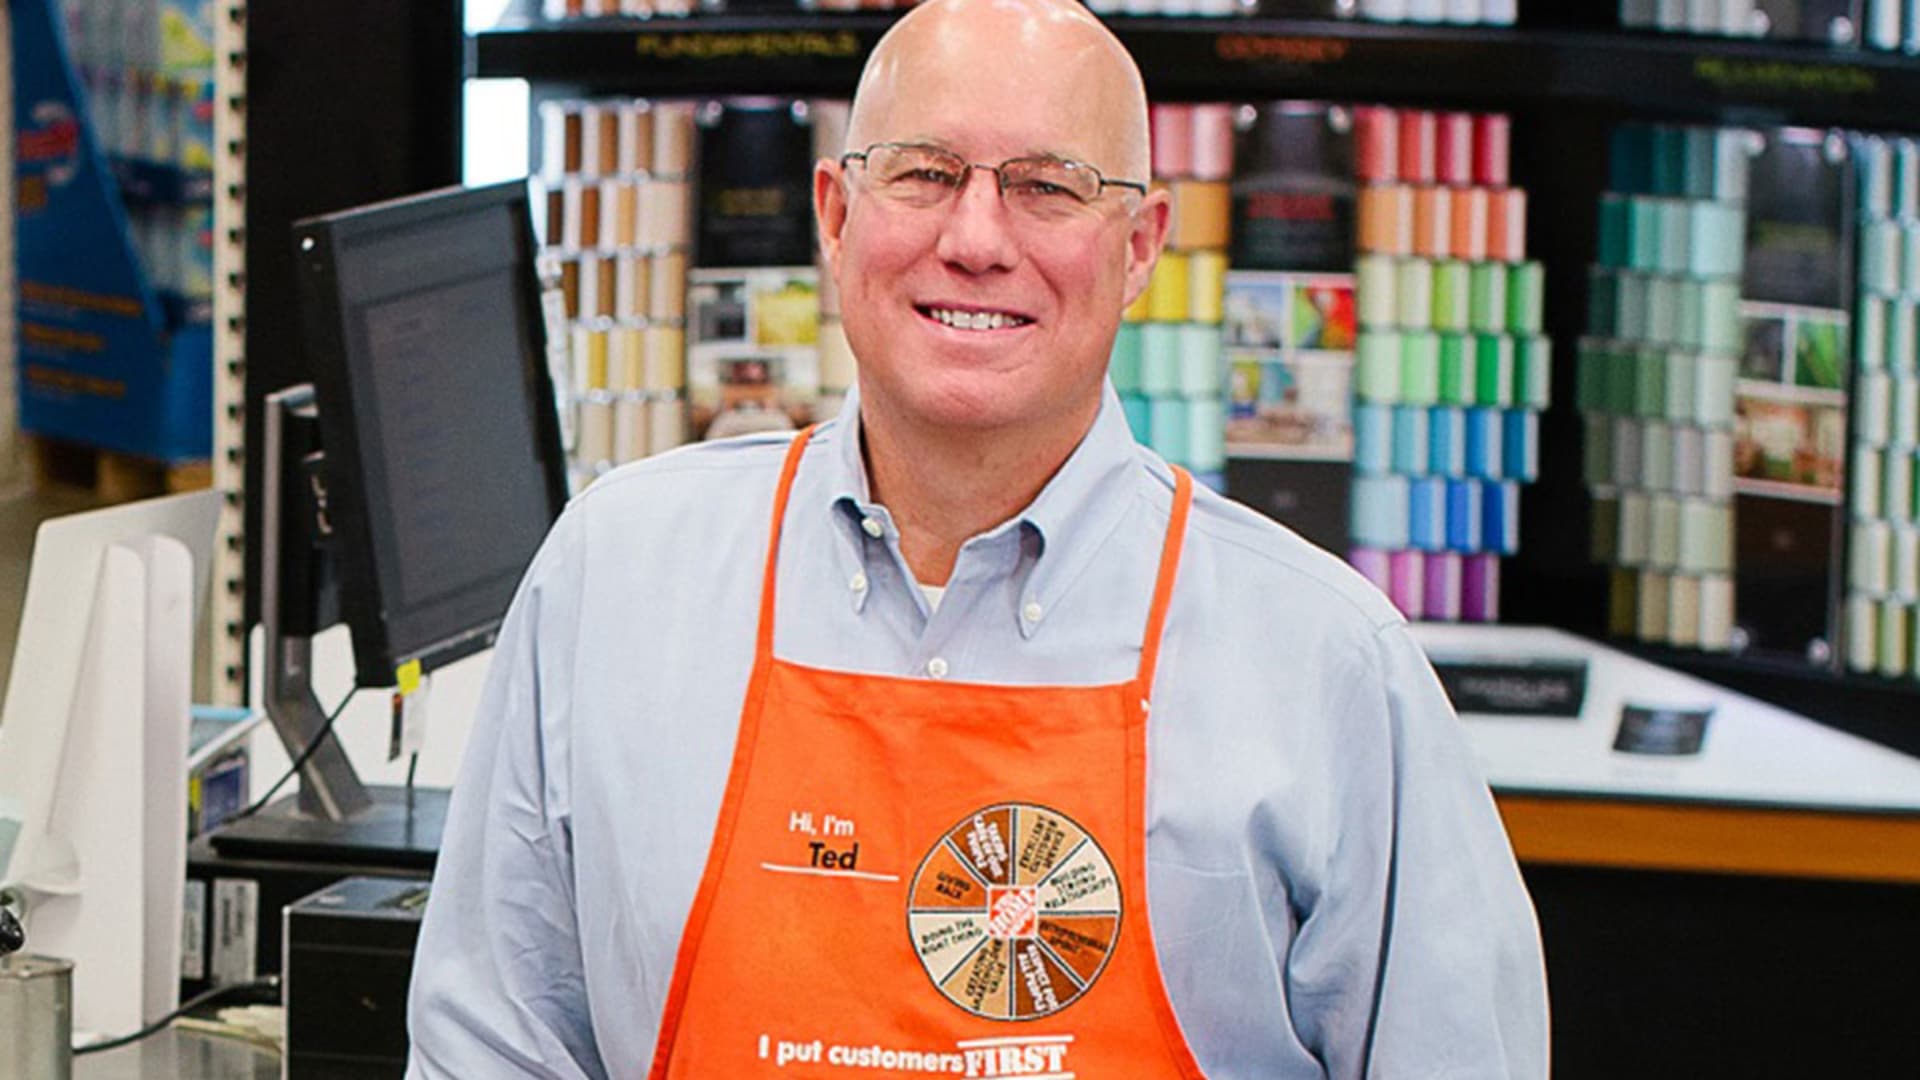 Home Depot CEO Ted Decker to replace retiring Craig Menear as chair